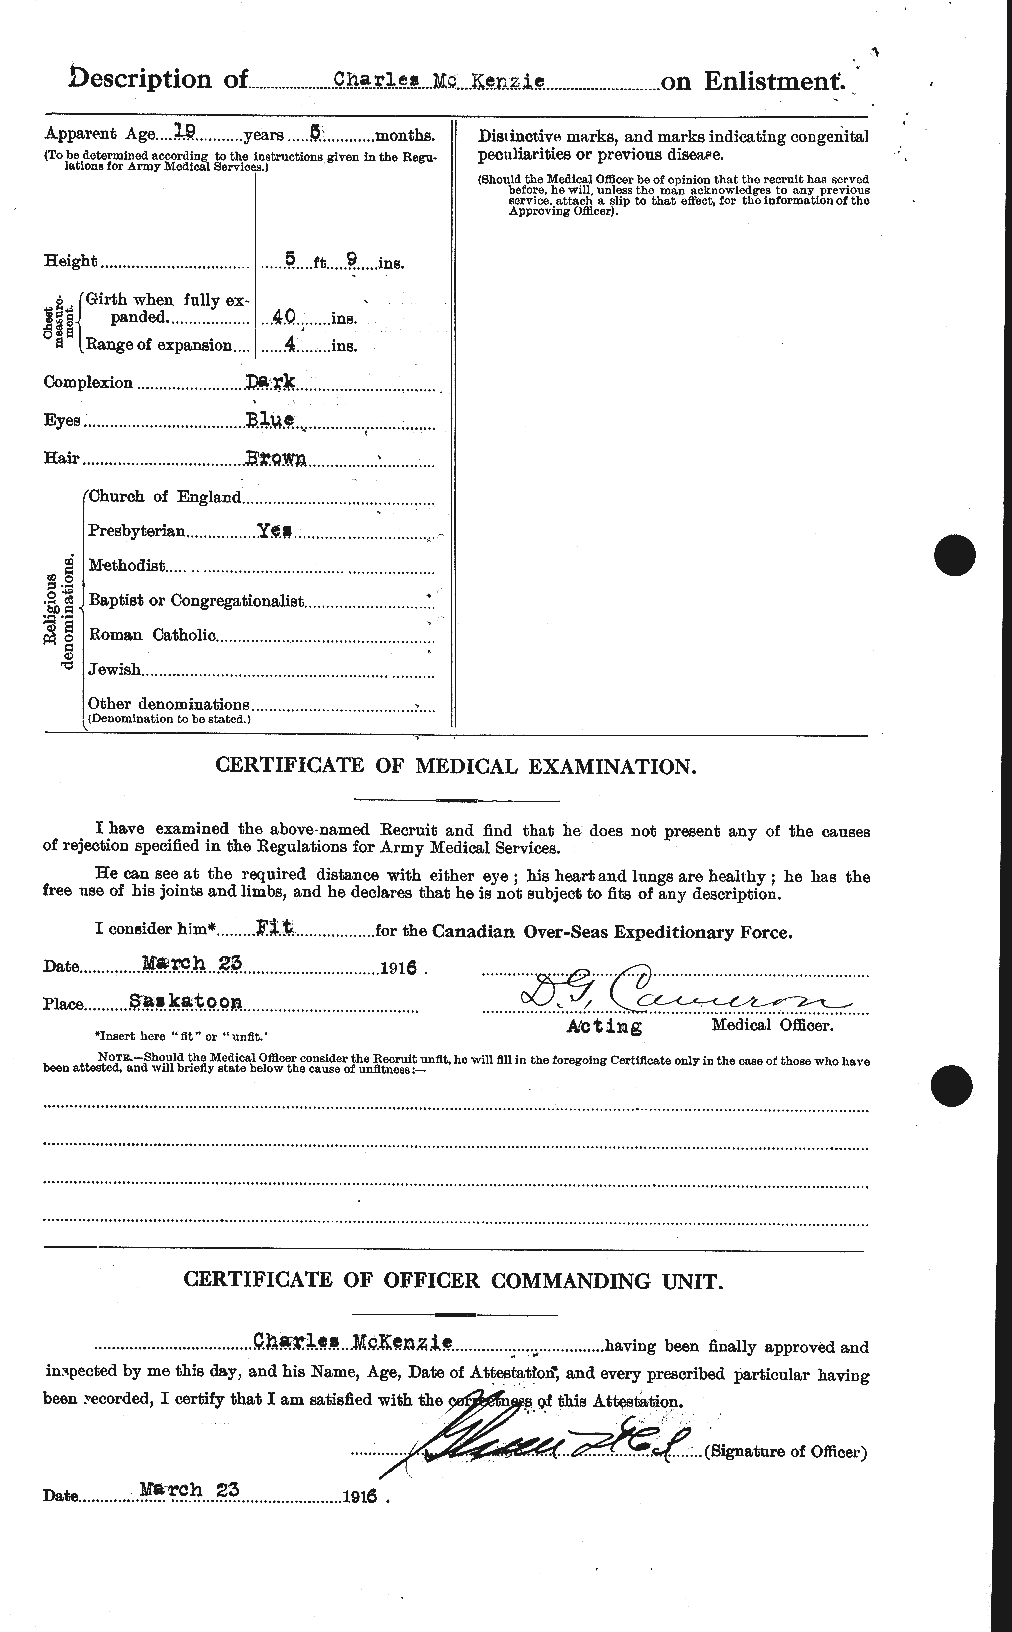 Personnel Records of the First World War - CEF 528915b